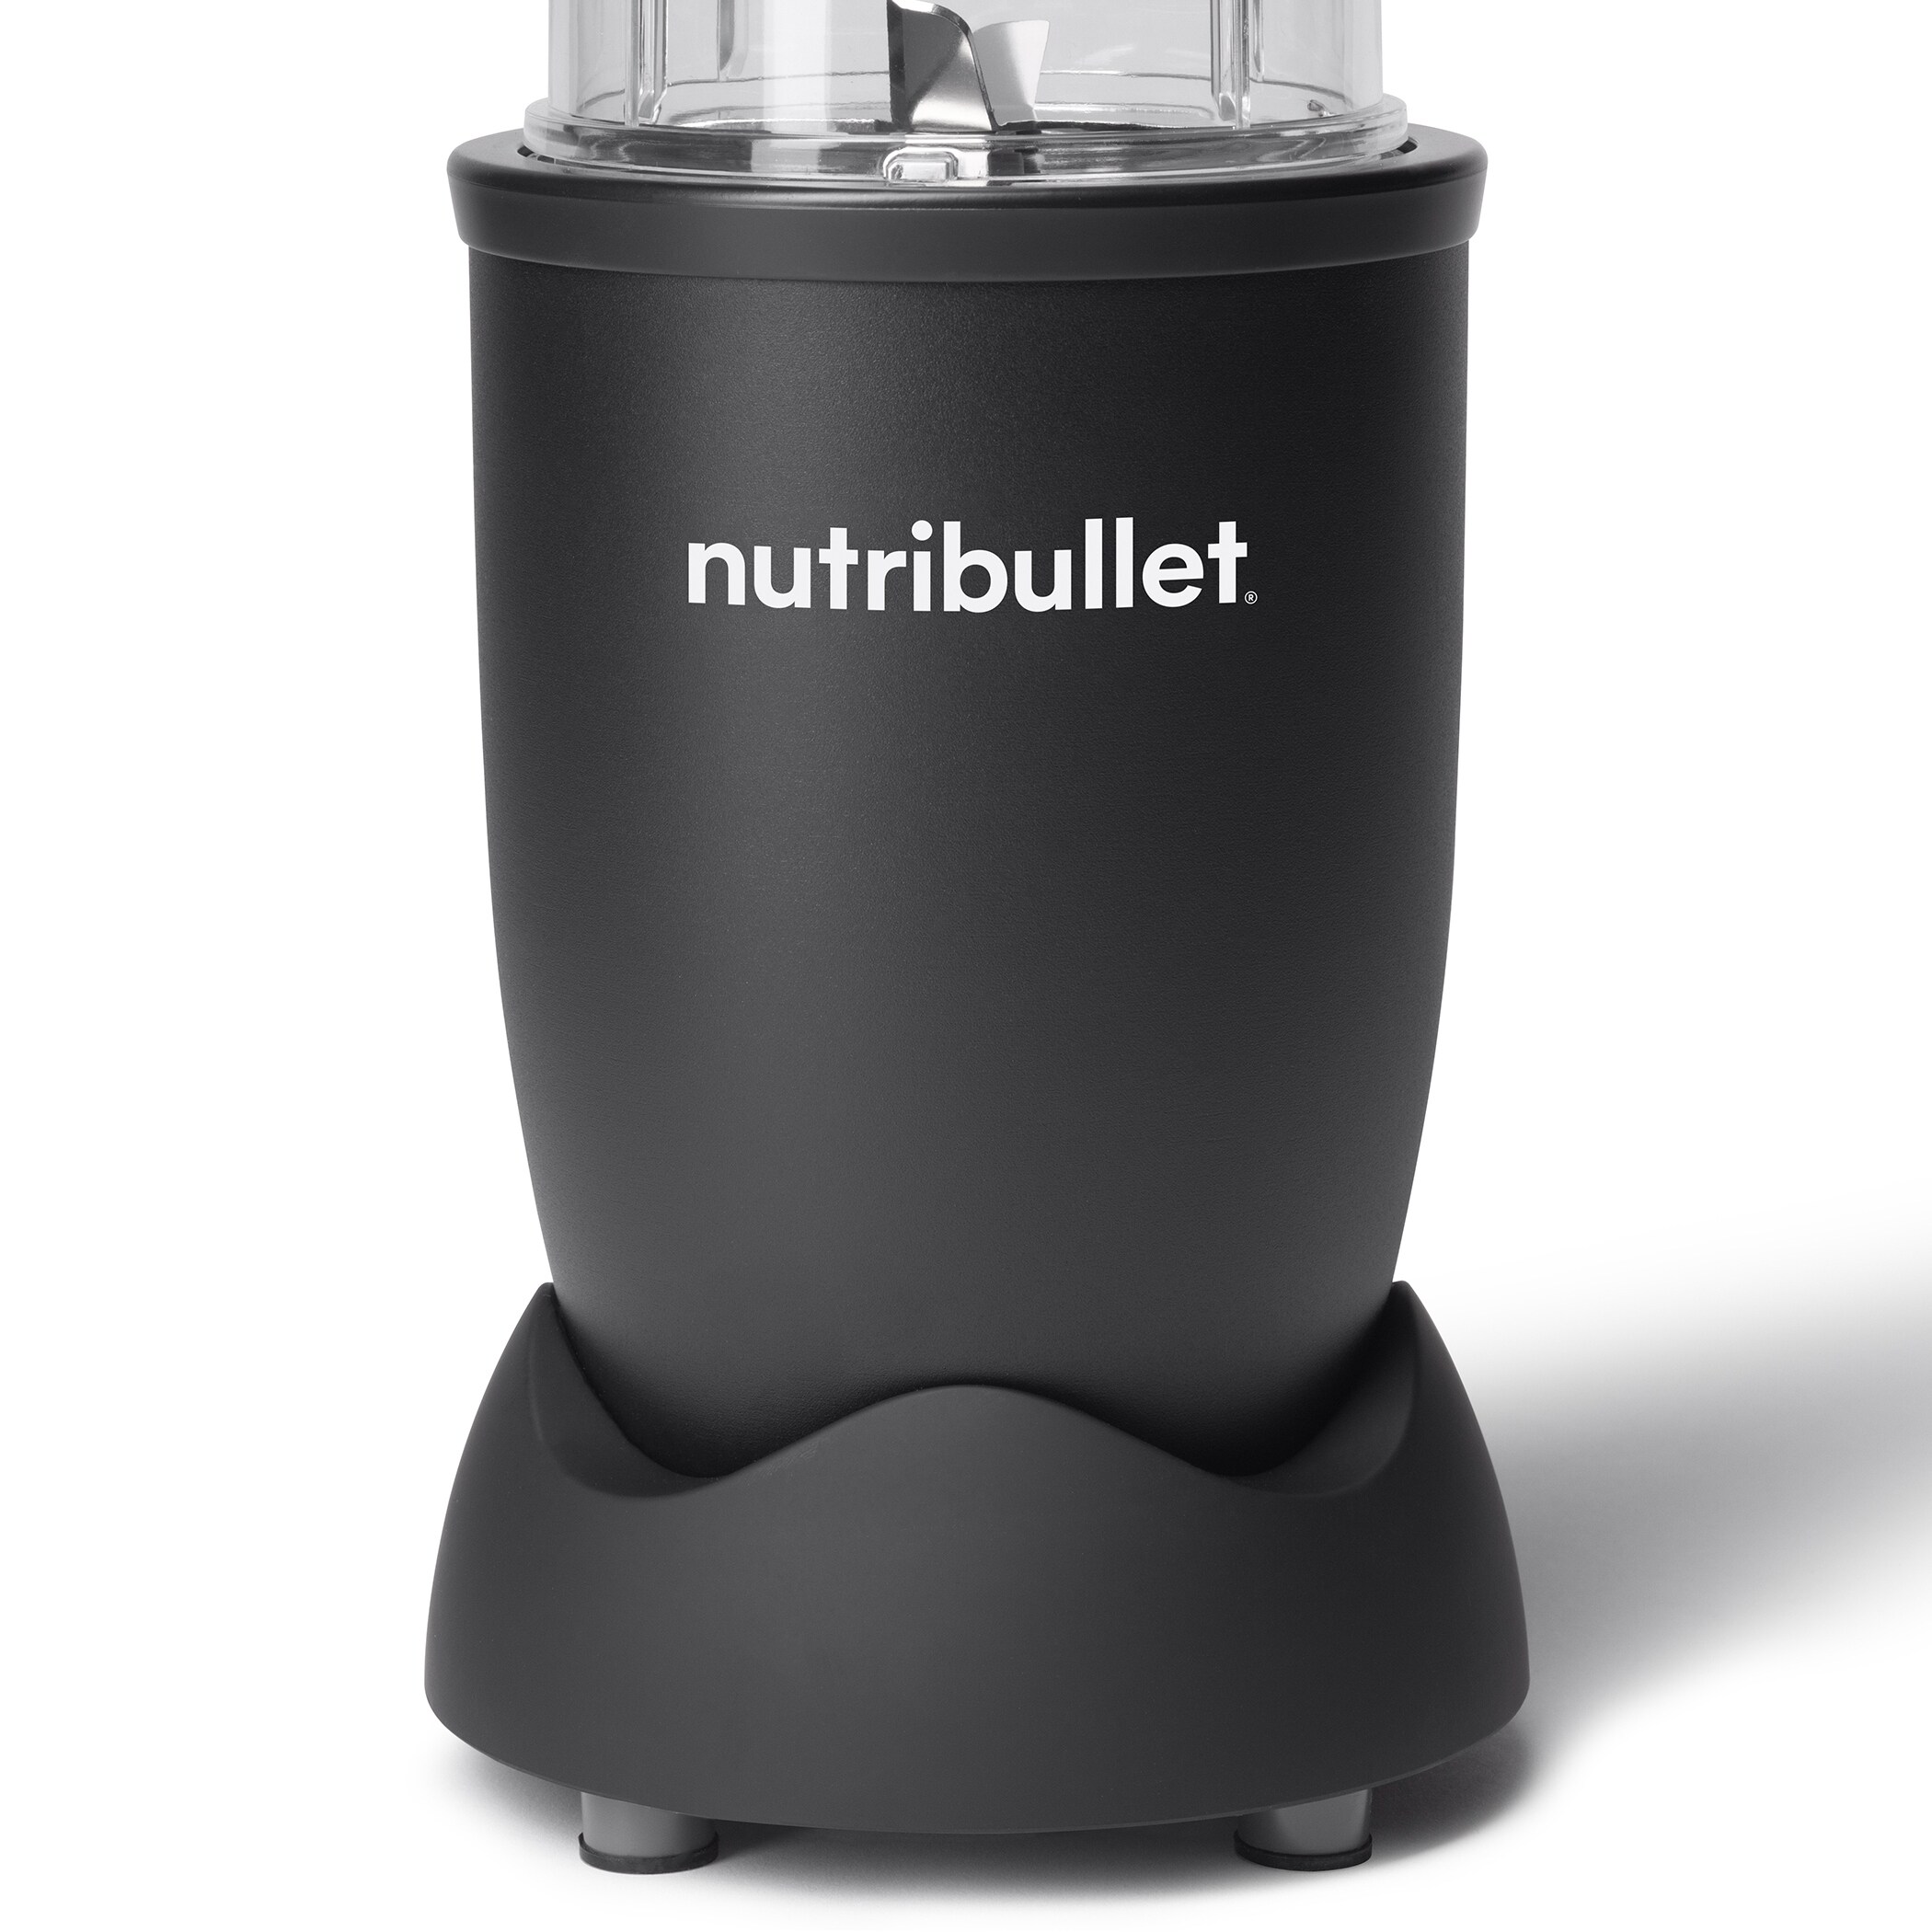 https://ak1.ostkcdn.com/images/products/is/images/direct/737cb50f2329aaecb36f149327f039c9015365ca/nutribullet-NB91301AW-Single-Serve-Blender.jpg